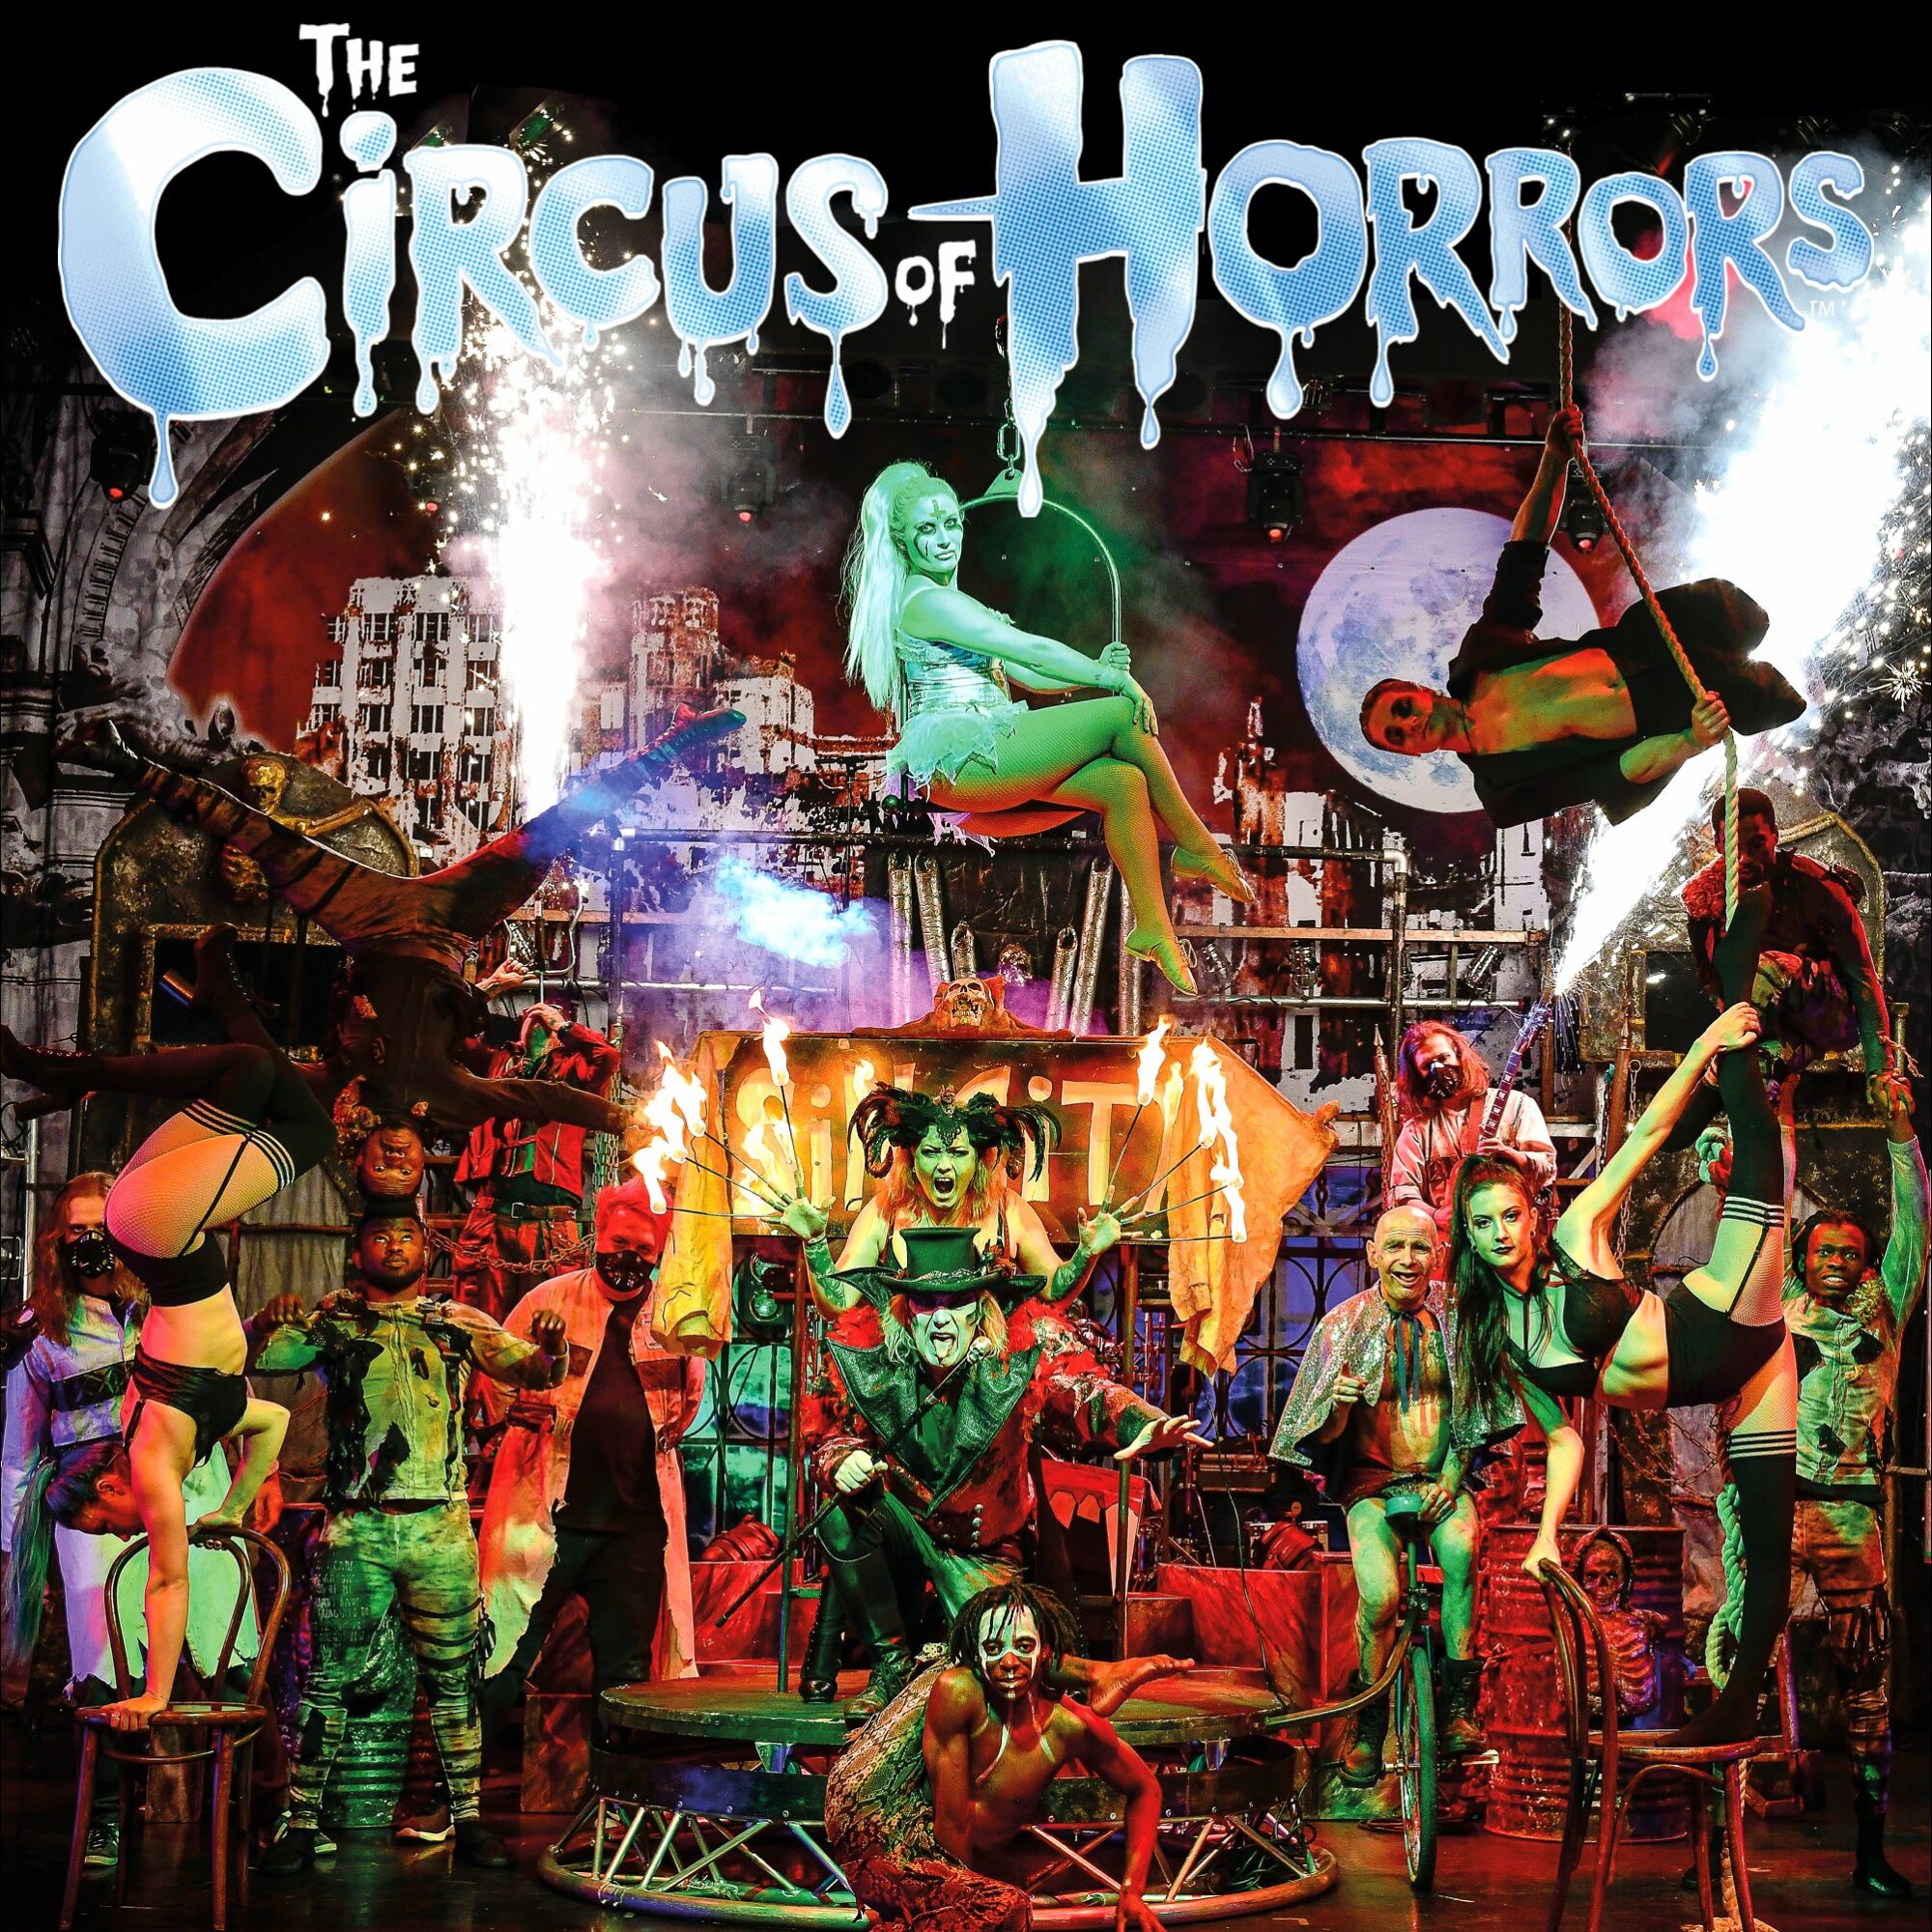 Image name Circus of Horrors at Connexin Live Hull the 1 image from the post Circus of Horrors - Cabaret of Curiosities at Sheffield City Hall Oval Hall, Sheffield in Yorkshire.com.